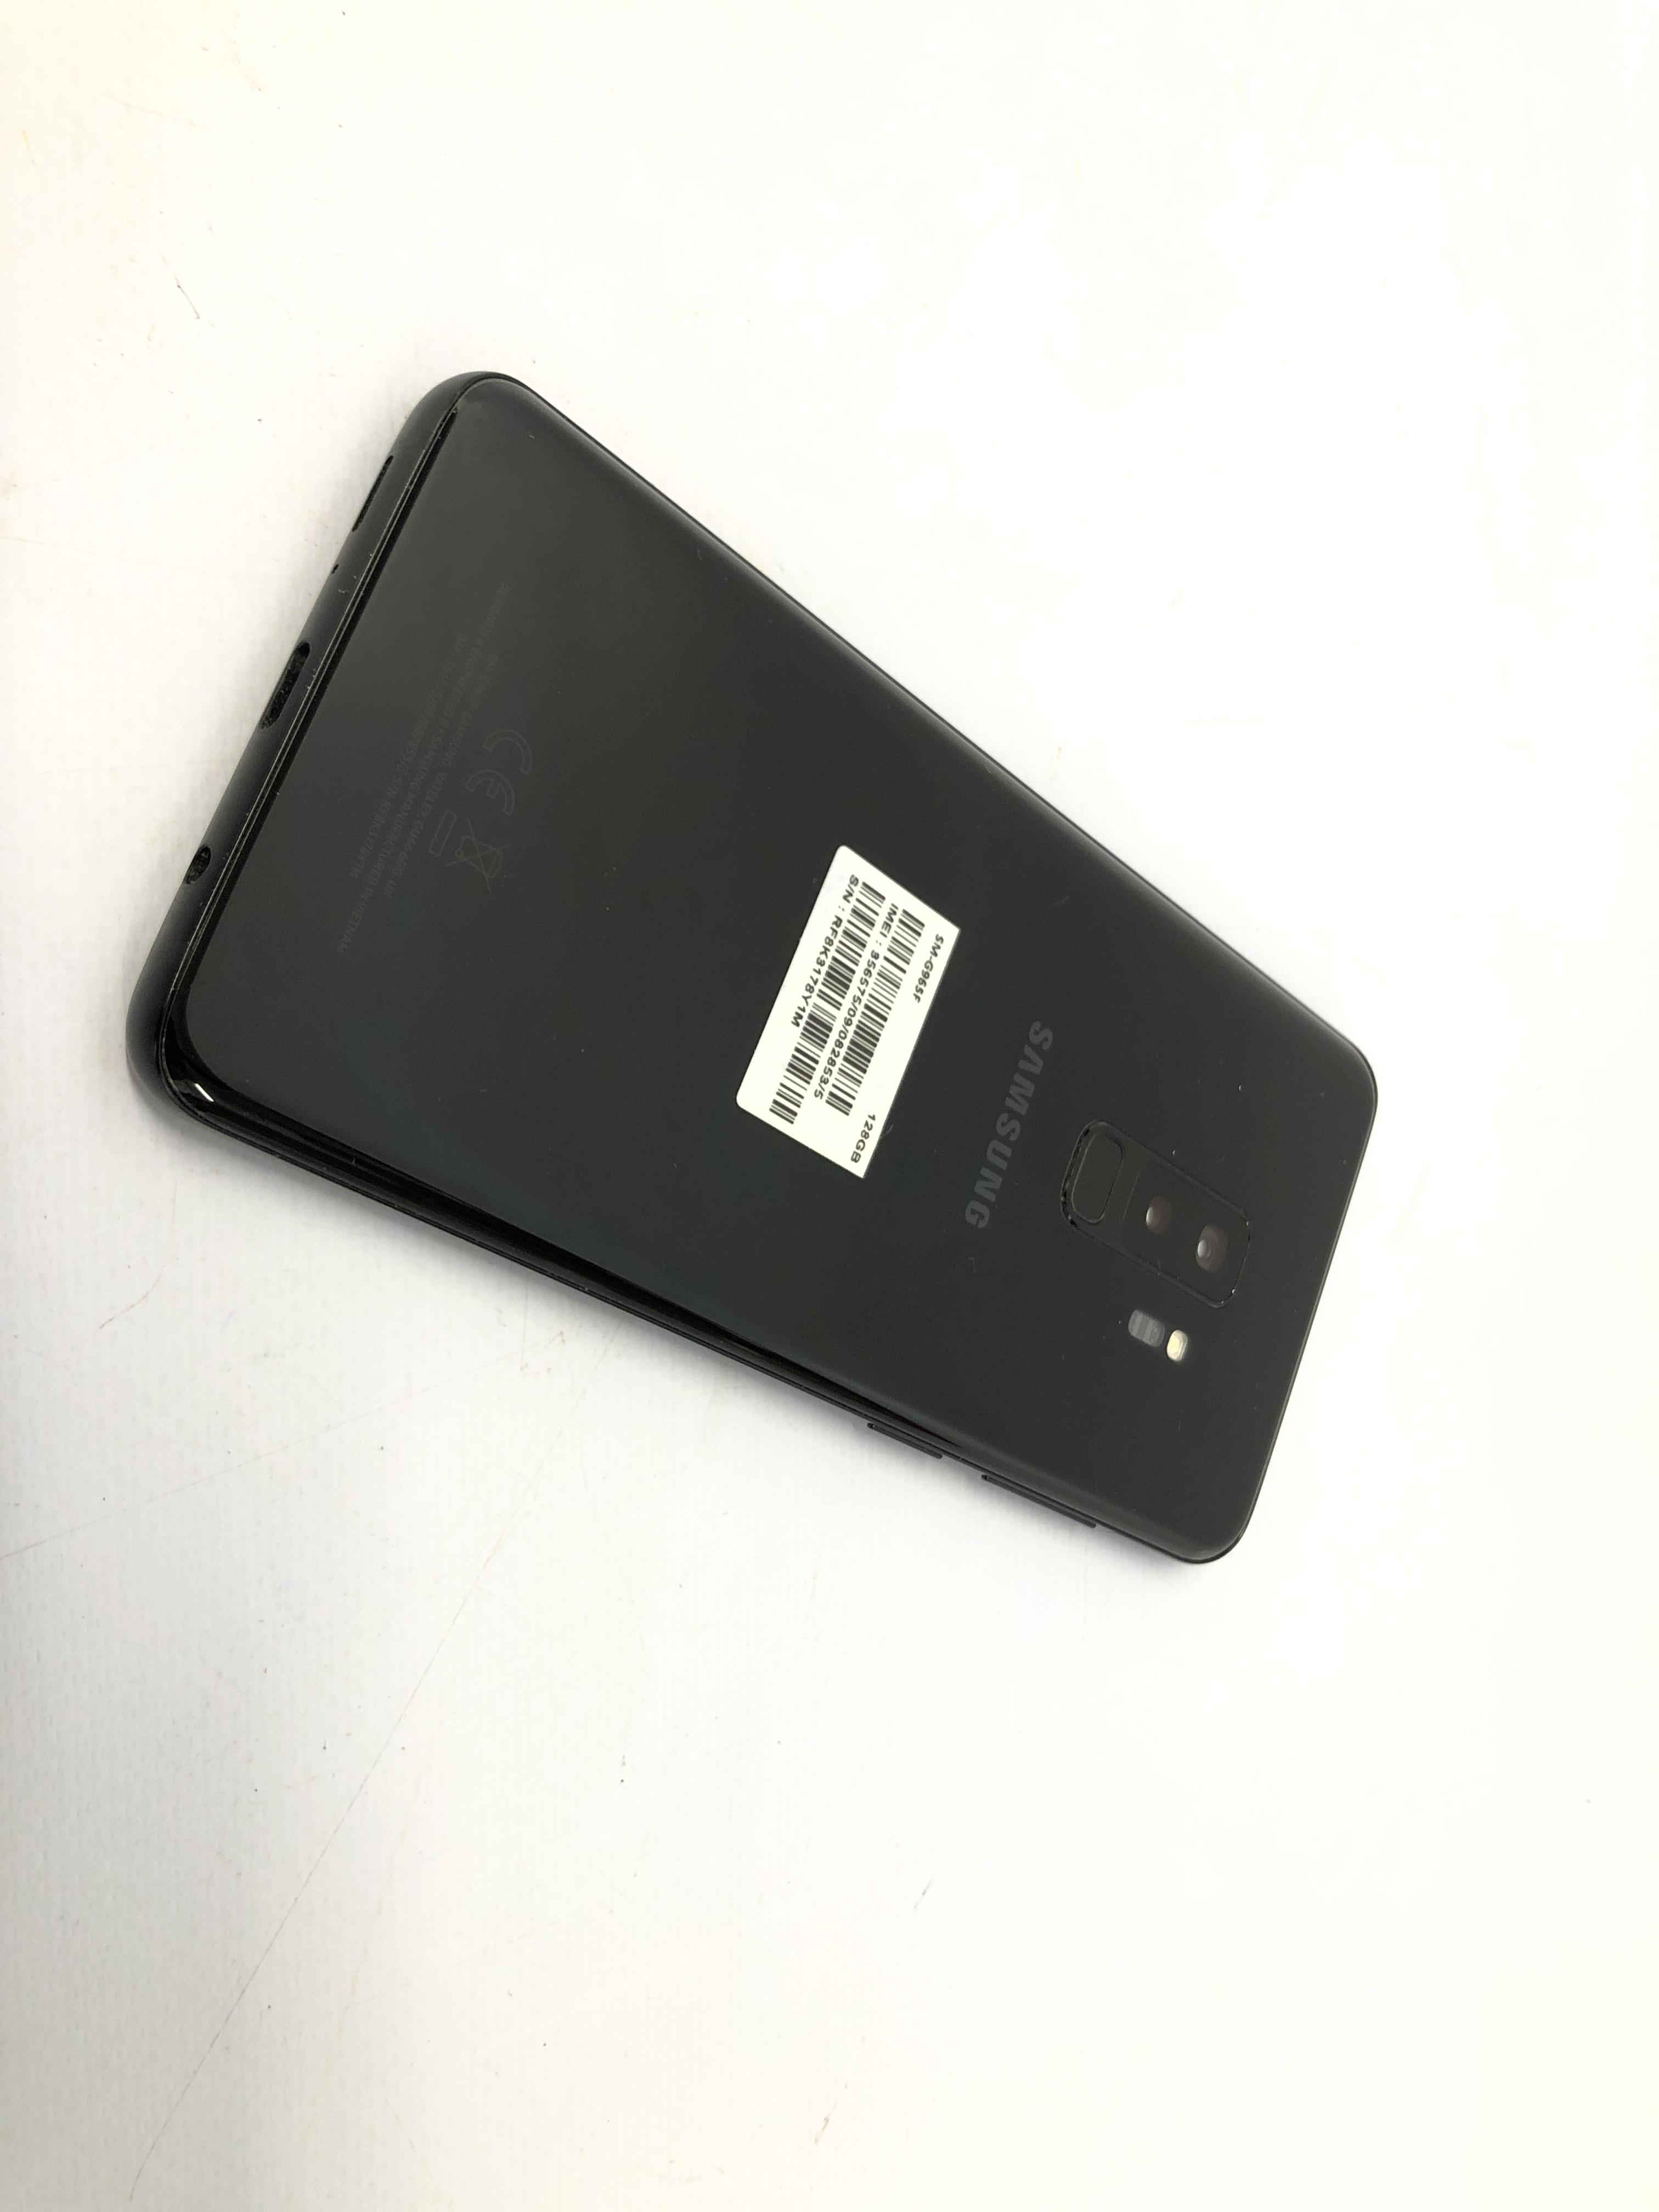 SAMSUNG GALAXY S9+ SMARTPHONE BOXED WITH ACCESSORIES 128GB MODEL SM-G965F - SOLD AS SEEN - Image 8 of 10